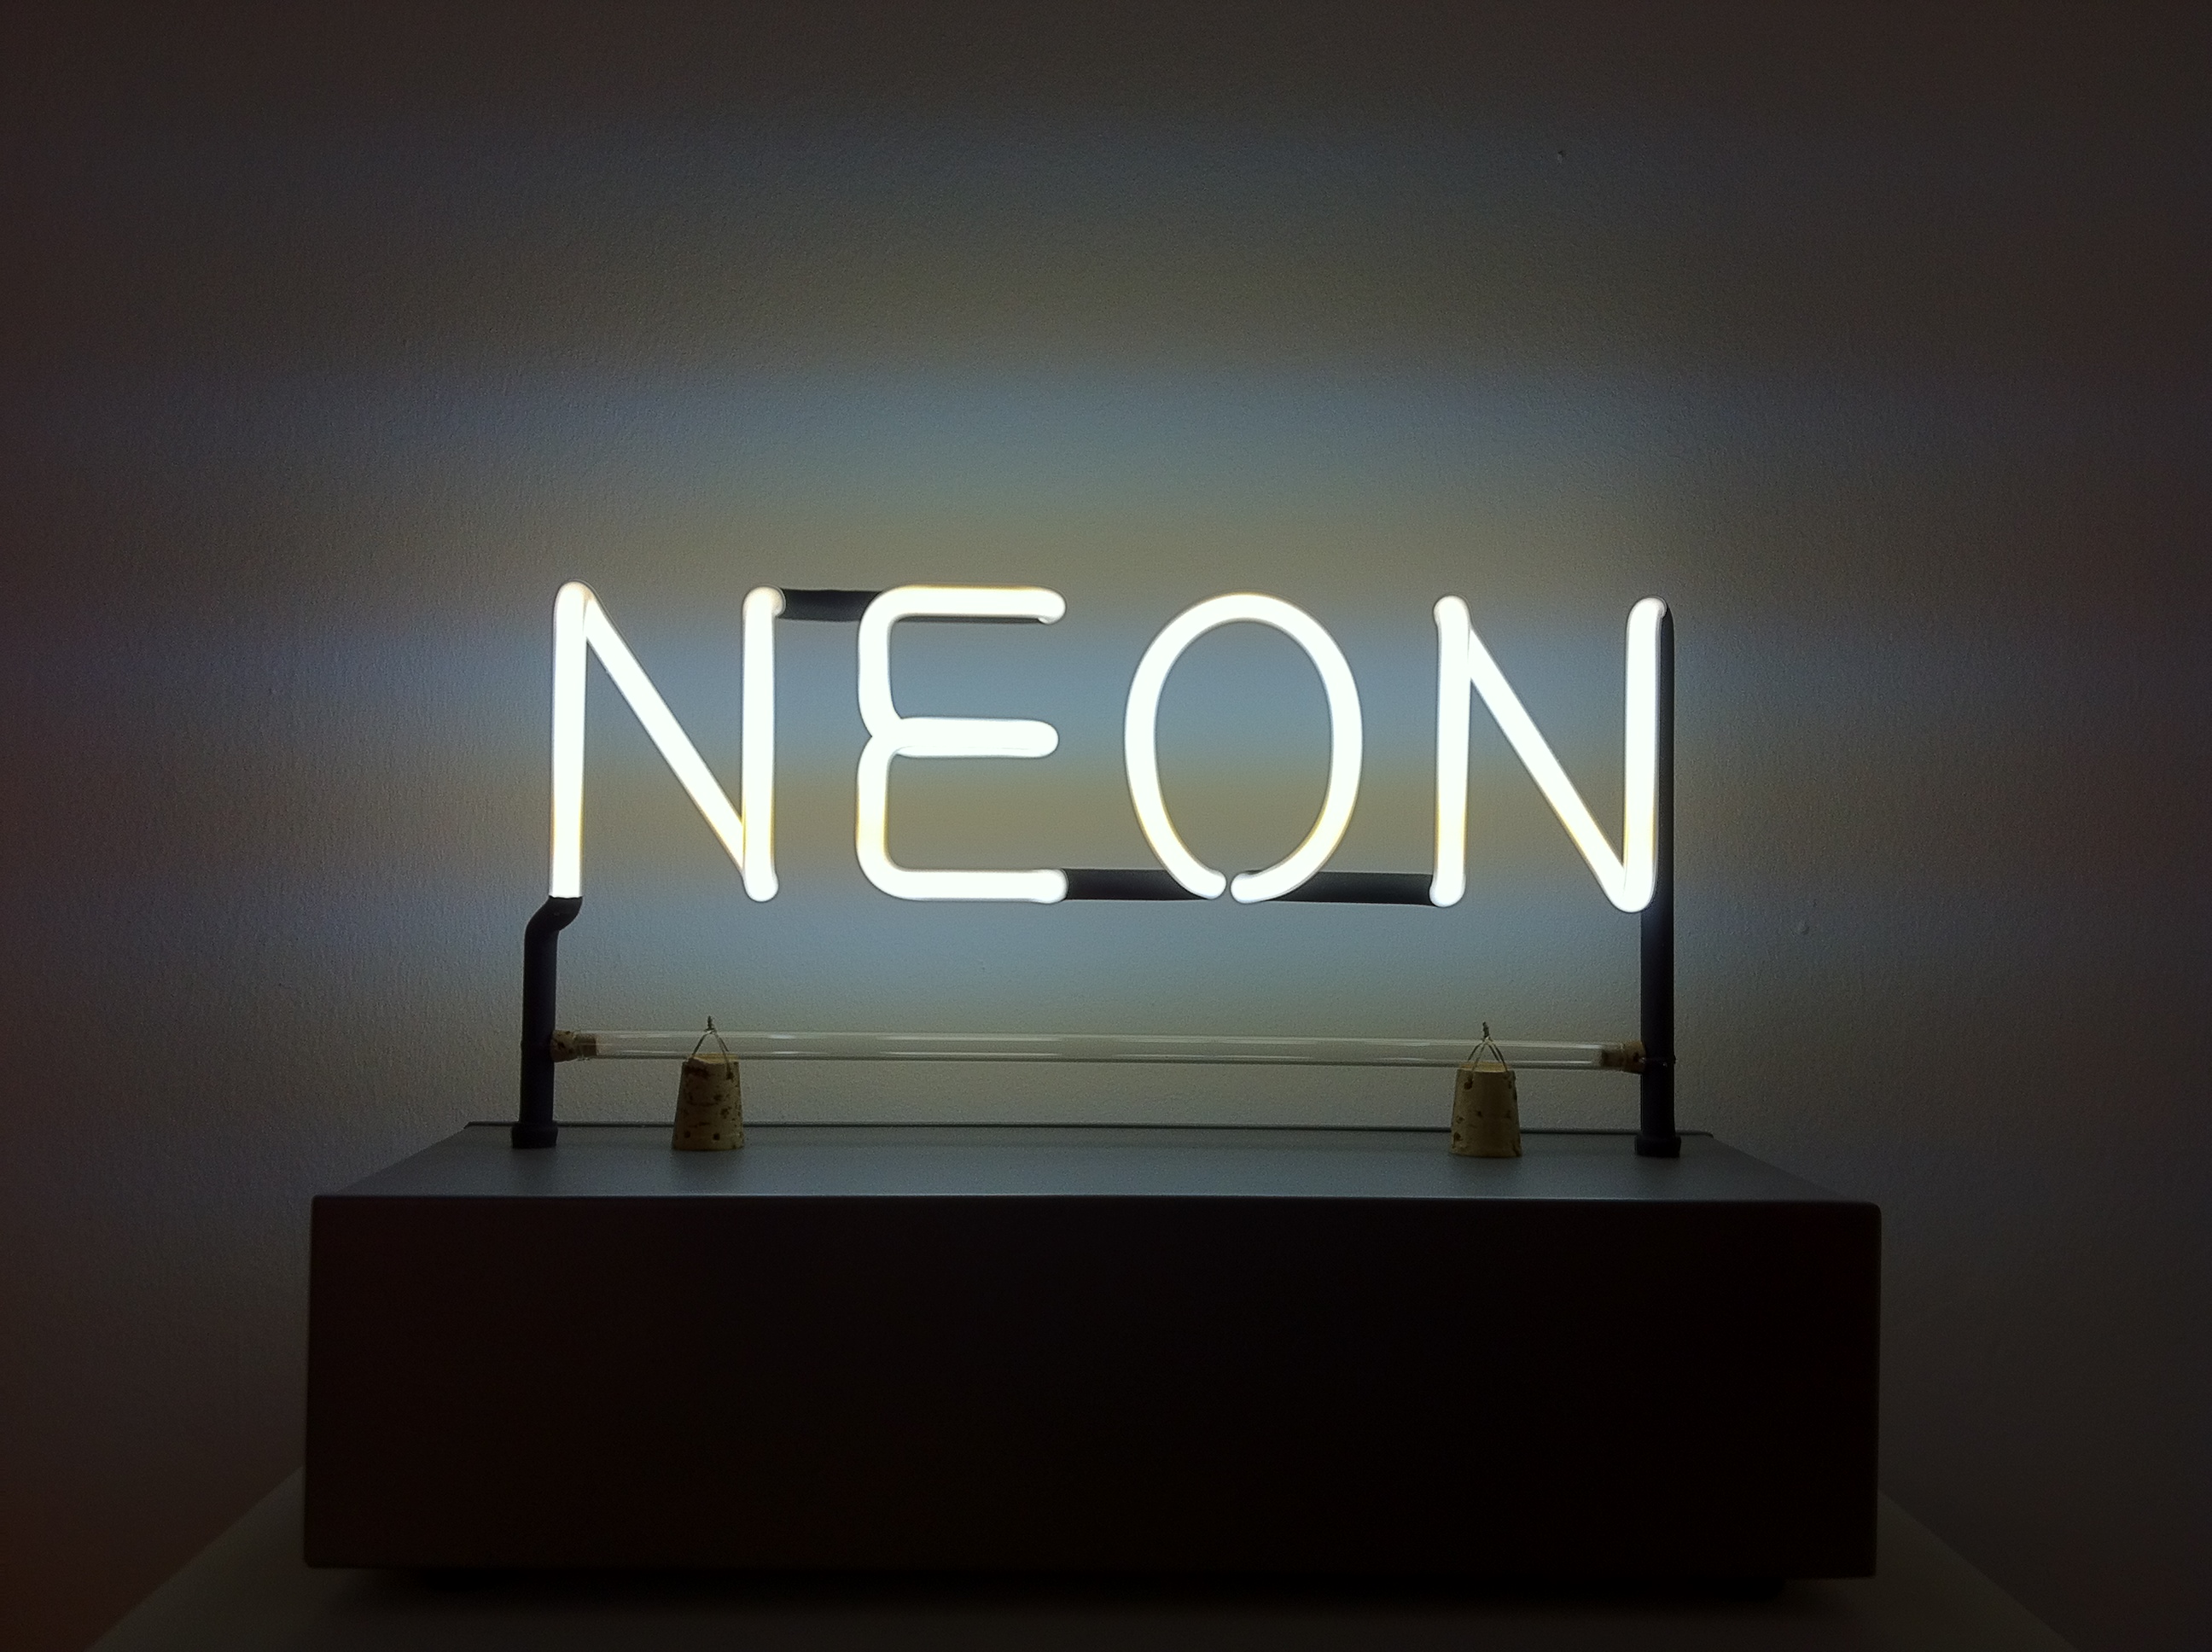 Neon artwork by artist Joseph Kosuth. The artwork is of the word neon in white neon lettering. Included in the exhibition NEON, The Charged Line.